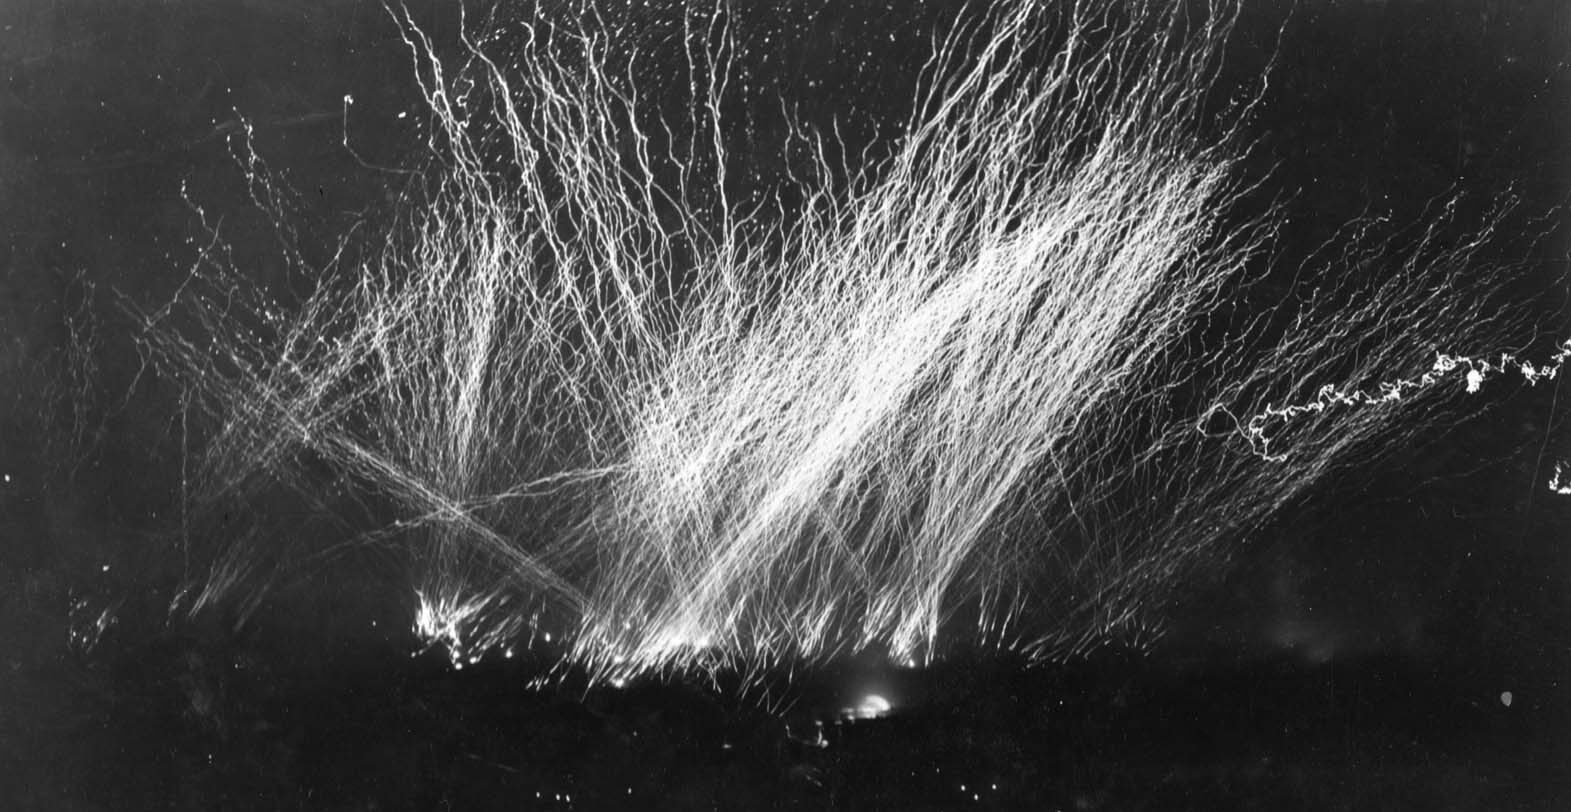 Friendly fire lights up the night sky over the beaches at Gela, Sicily, as American gunners mistakenly open up on paratroopers of the 504th Parachute Infantry Regiment during a follow-up deployment in Operation Husky.  